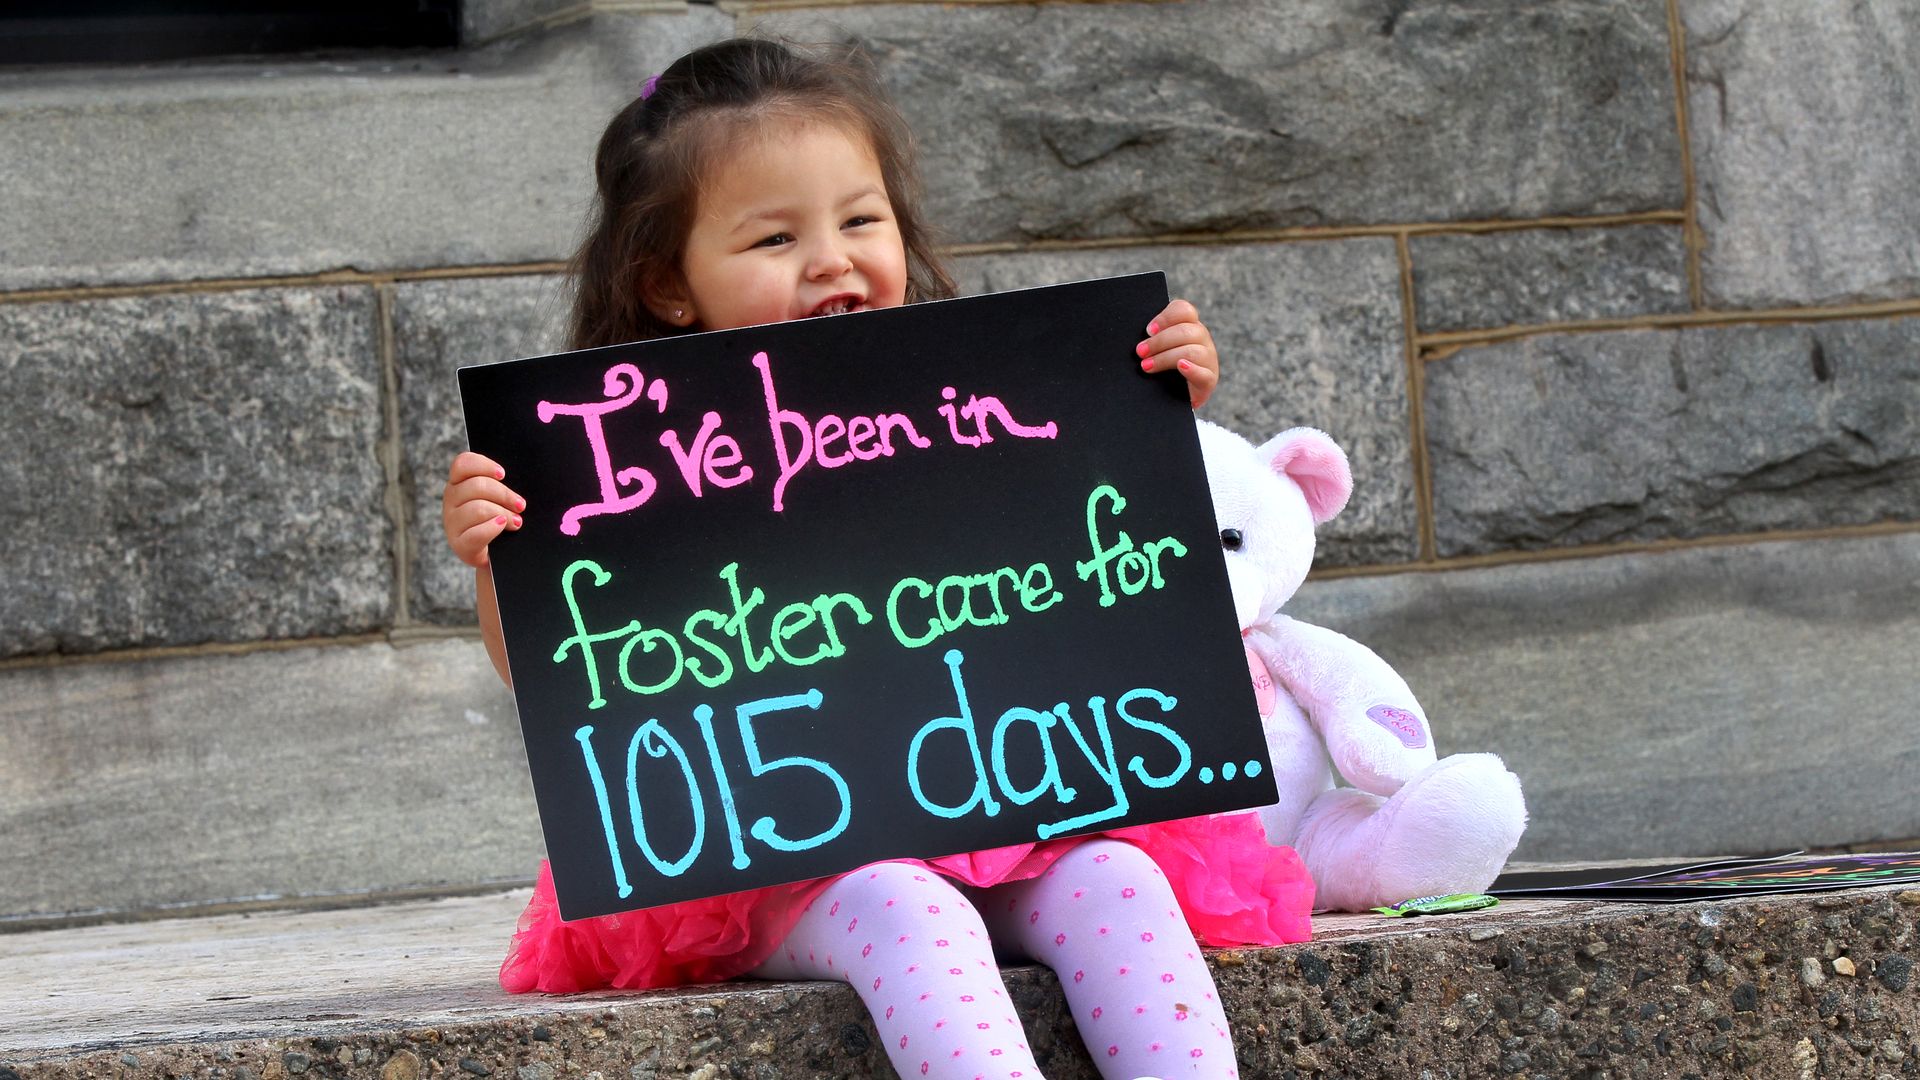 Alexandra Rubio holds a sign that reads, "I've been in foster care for 1,015 days" while sitting on the steps of a Massachusetts courthouse before her adoption proceedings.